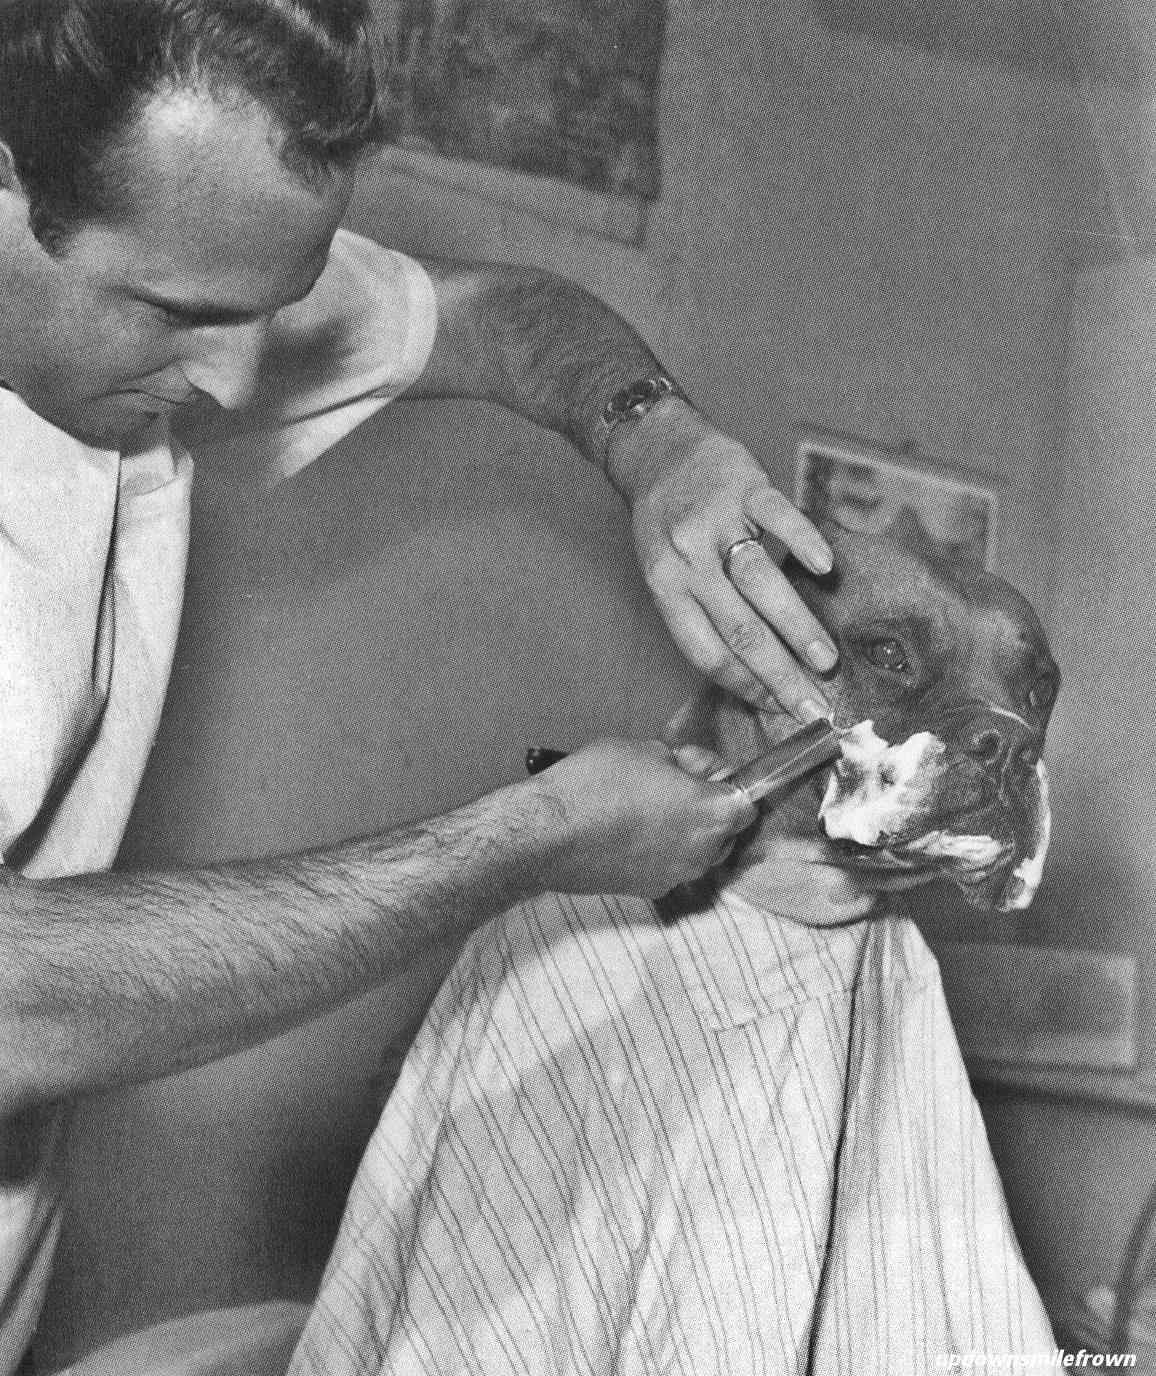 40 Unbelievable Historical Photos - Fritz, a television celebrity bulldog, is shaved by a Californian barber. April, 1961.